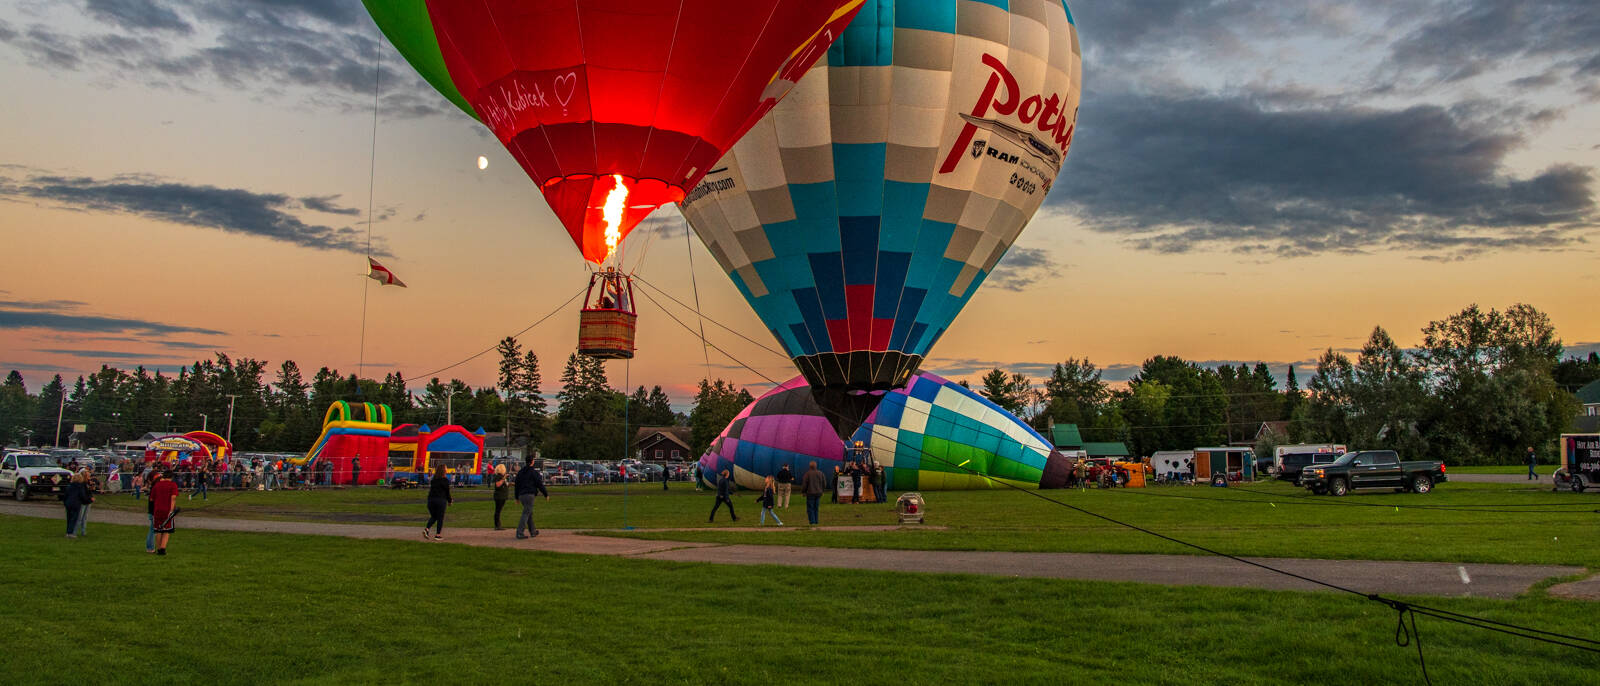 Image of 20th Crown of Maine Balloon Festival by Wayne Foote